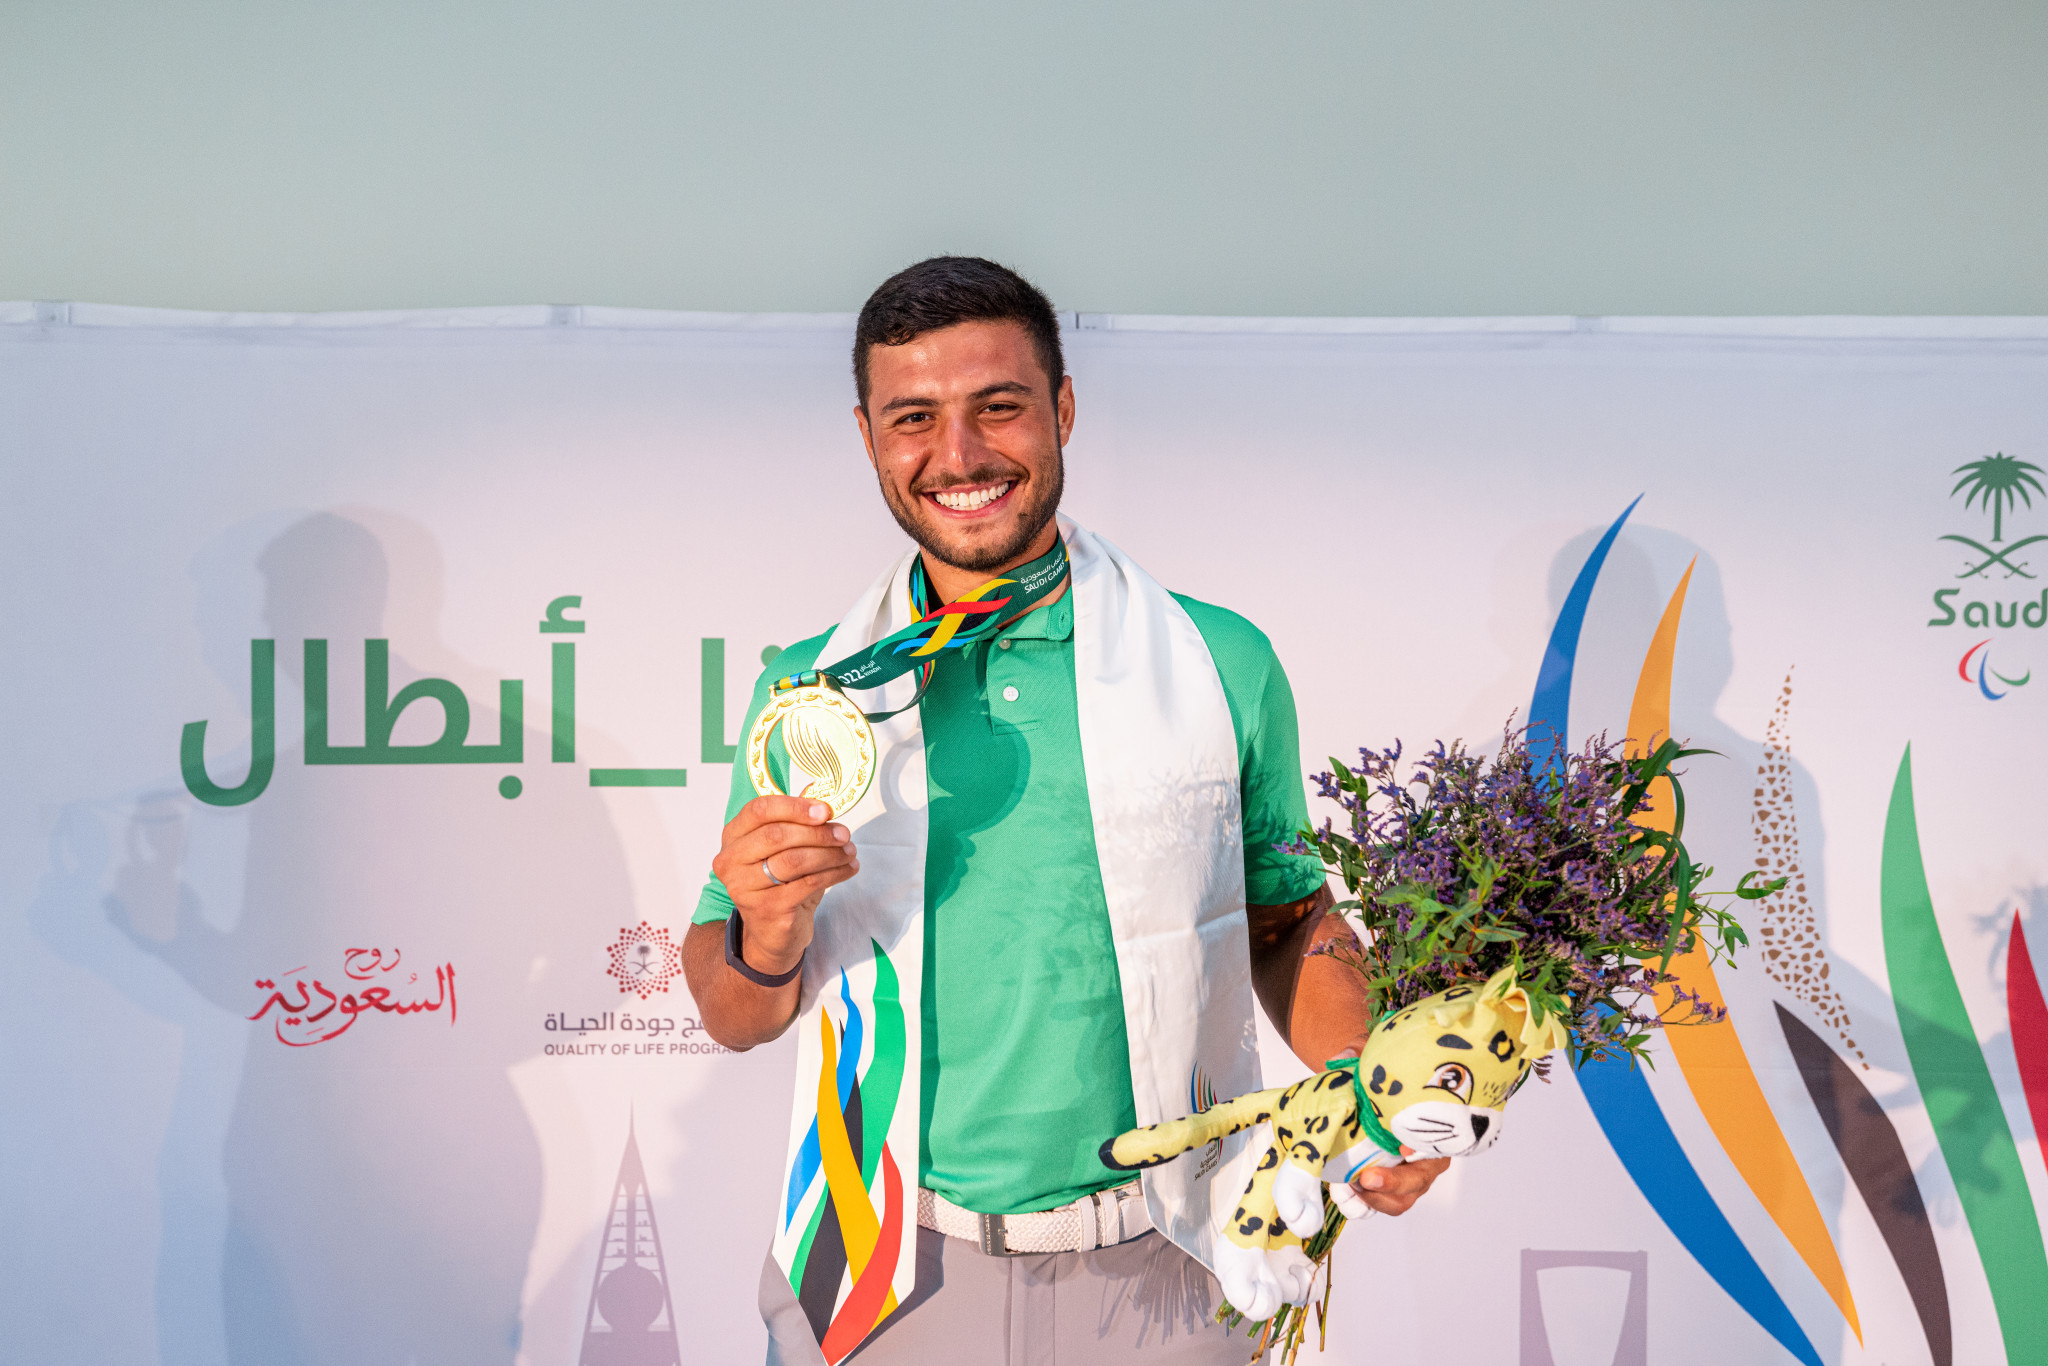 Faisal Al-Salhab topped the two-day golfing charts ©Saudi Games